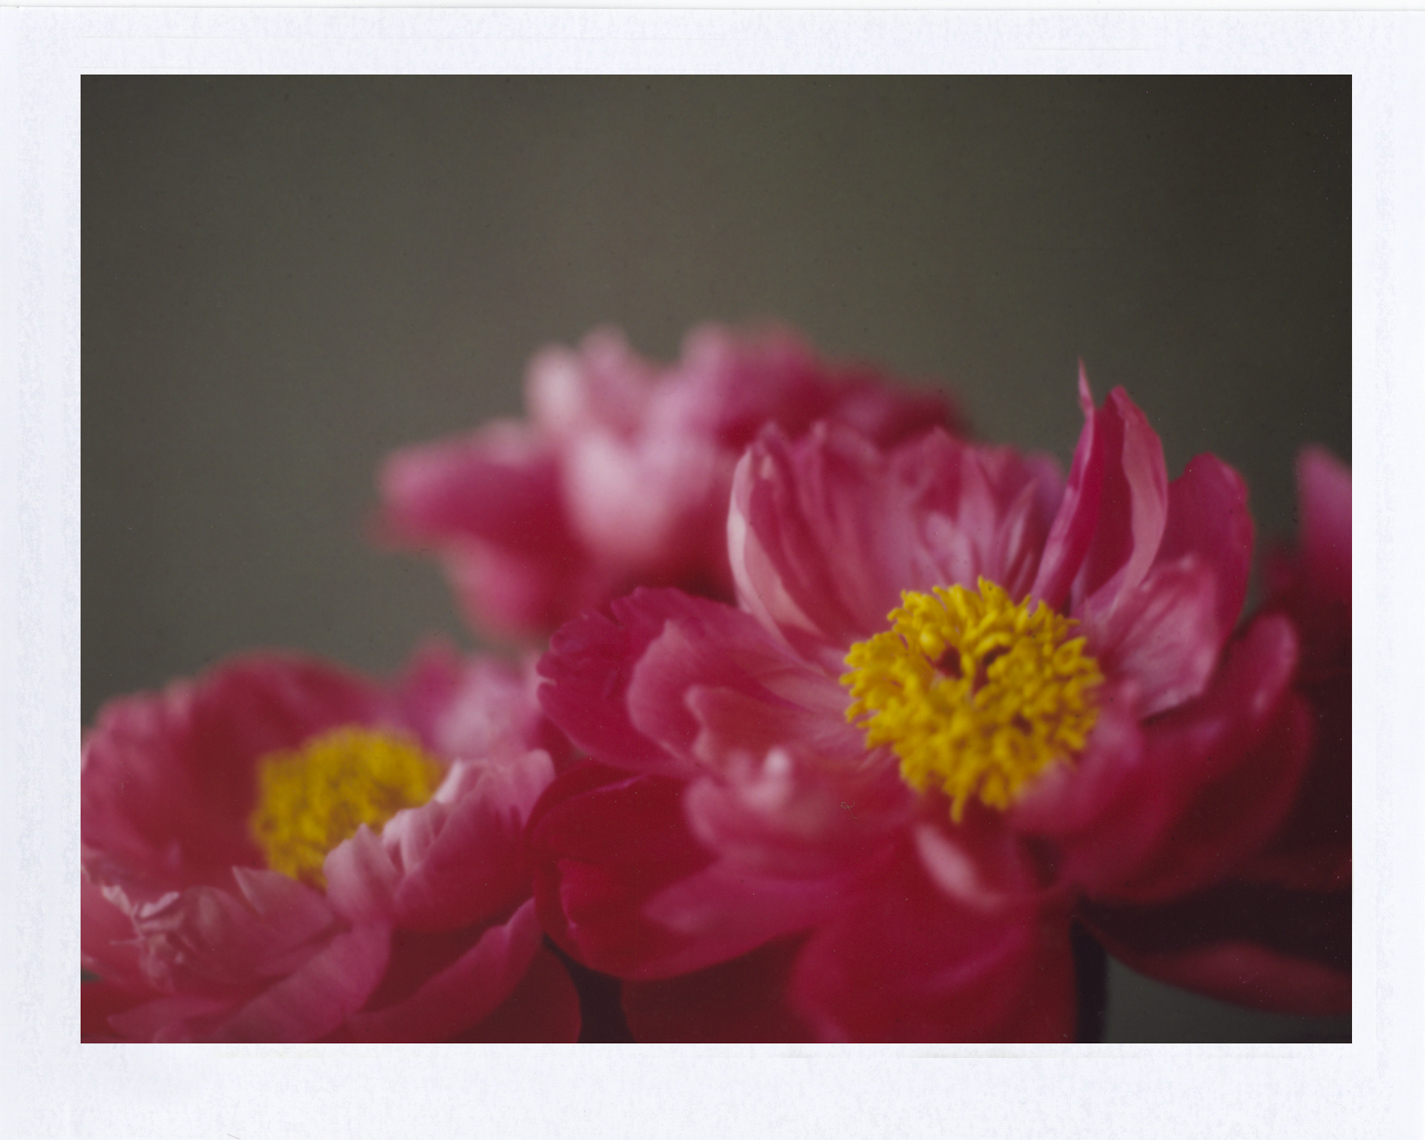 Saturated pink colors| Photographers who shoot film